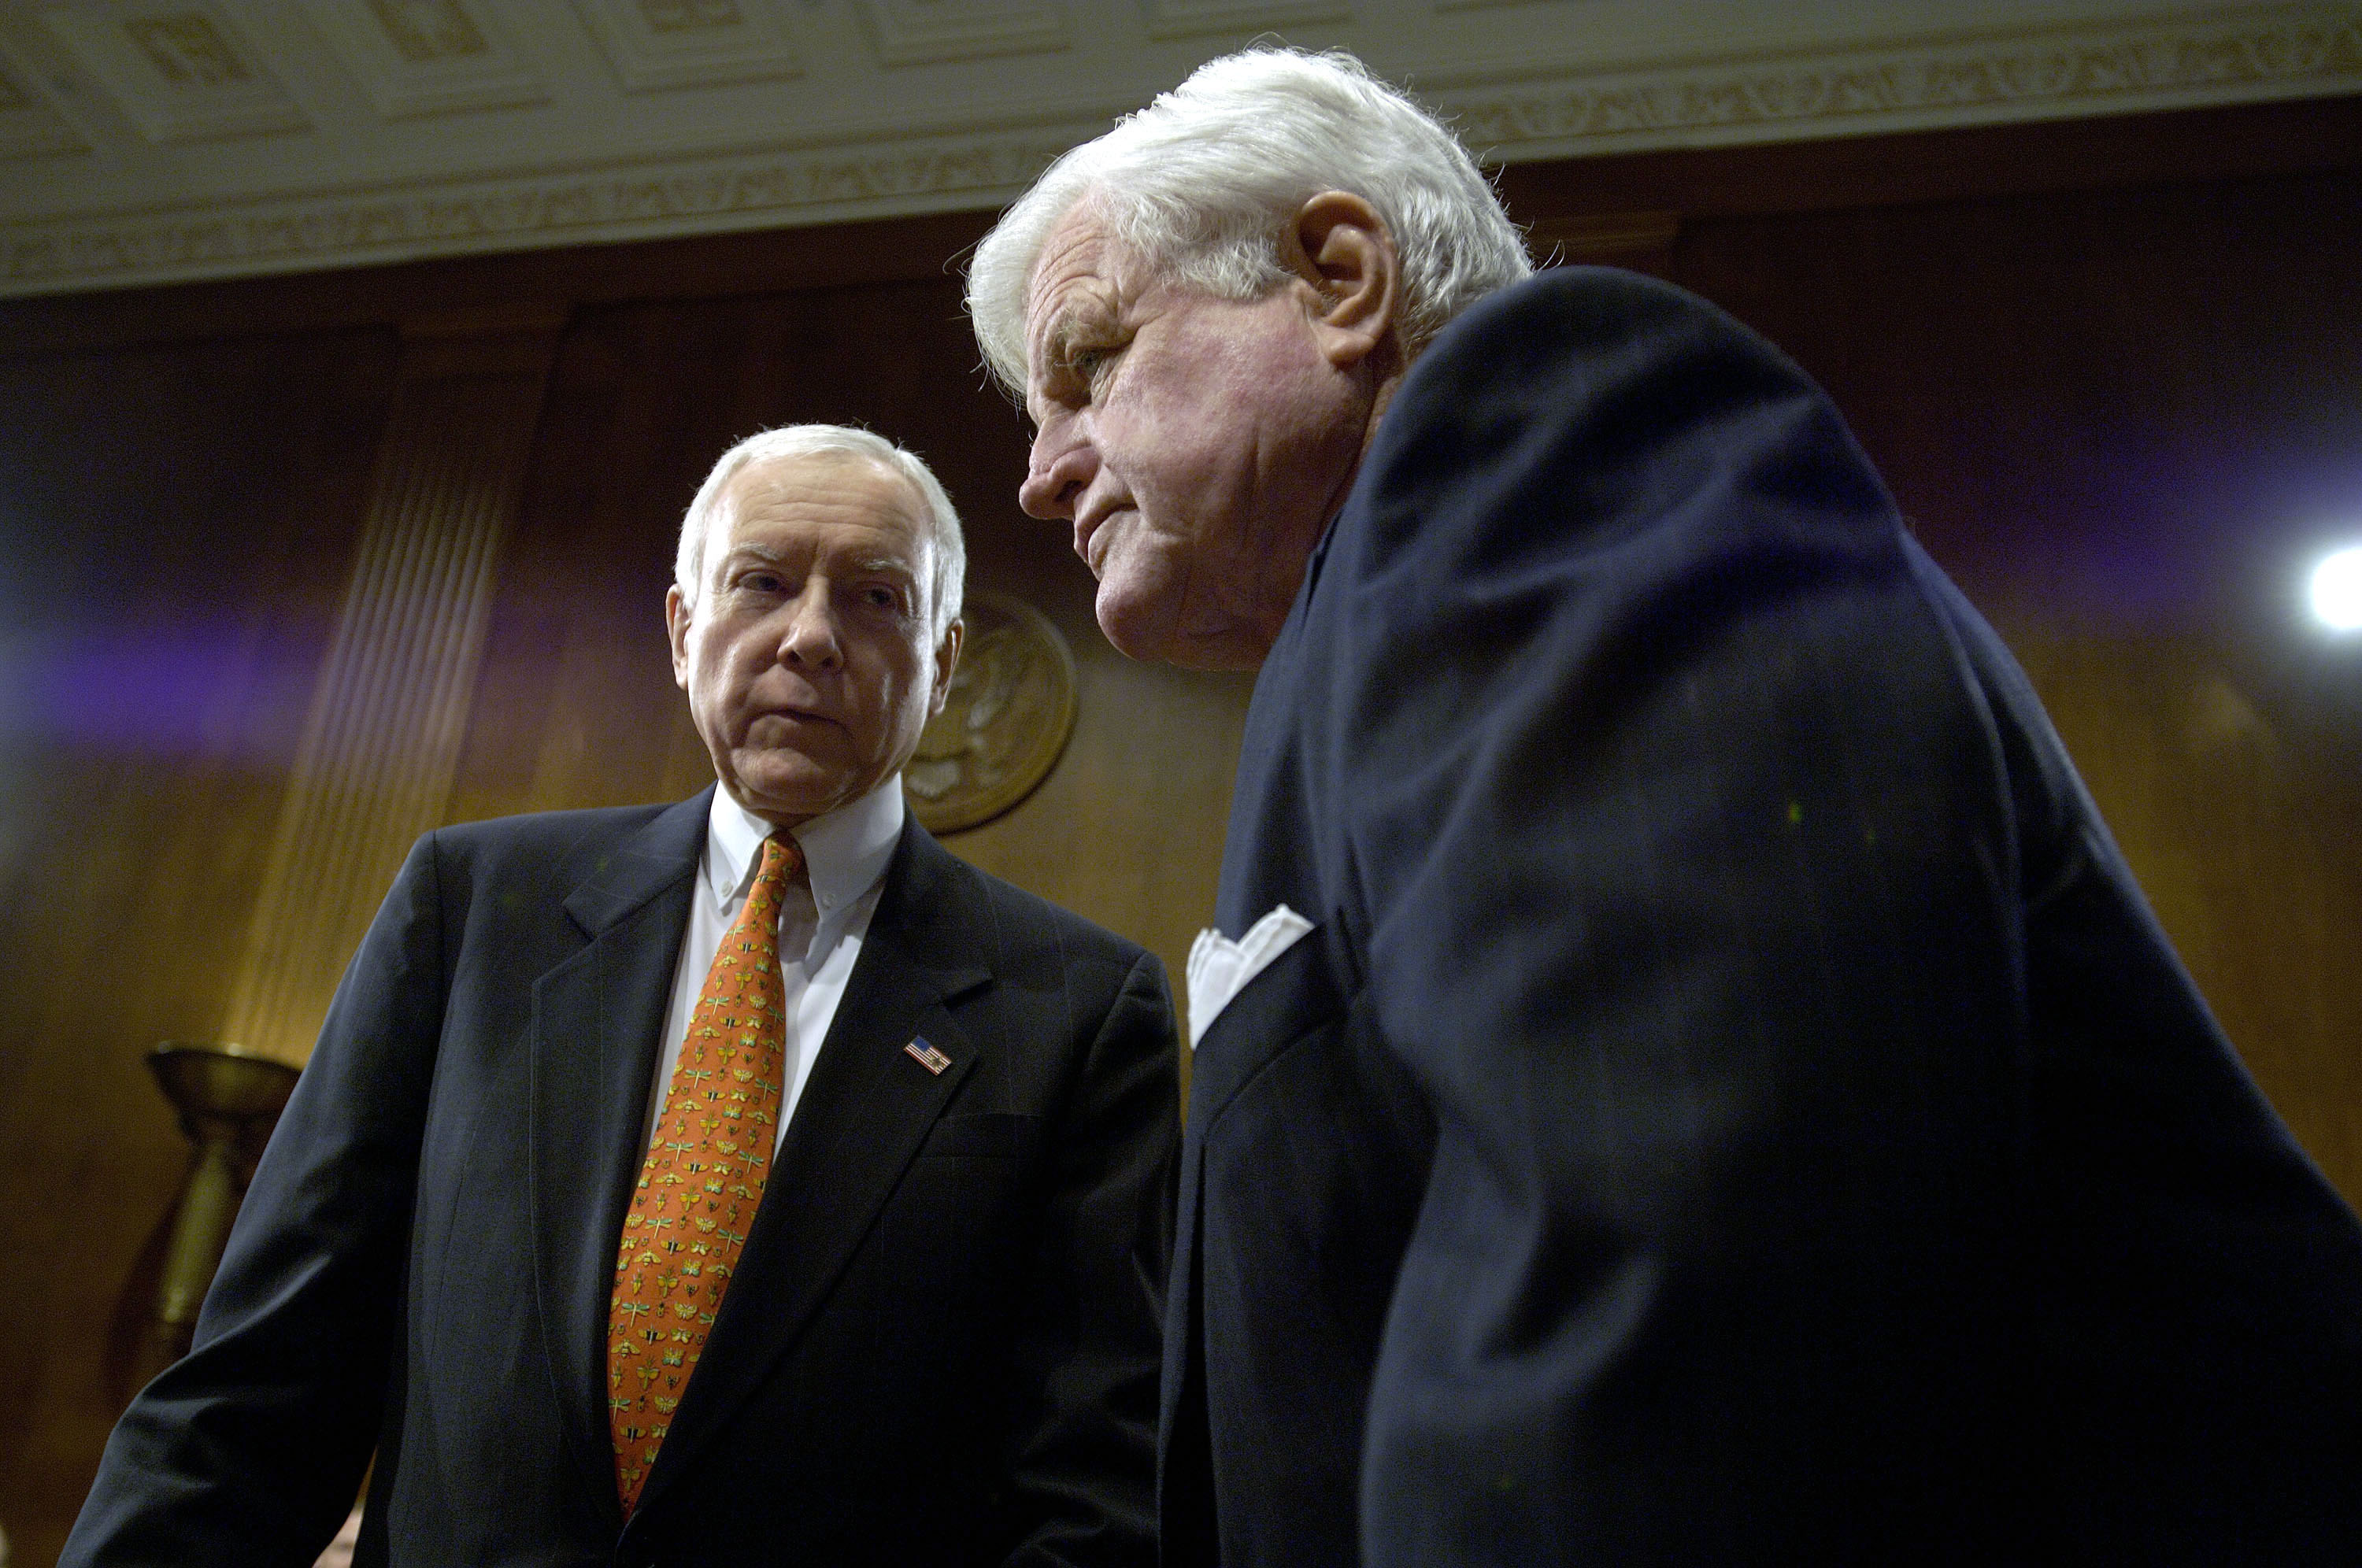 Senator Orrin G. Hatch (R-UT), left, and Senator Edward Kennedy (D-MA), confer prior to the Senate Judiciary Committee Markup to vote on the nomination of Judge Samuel Alito to the U.S. Supreme Court on Jan. 24, 2006 in Washington, D.C. (Chris Greenberg&mdash;Bloomberg/Getty Images)